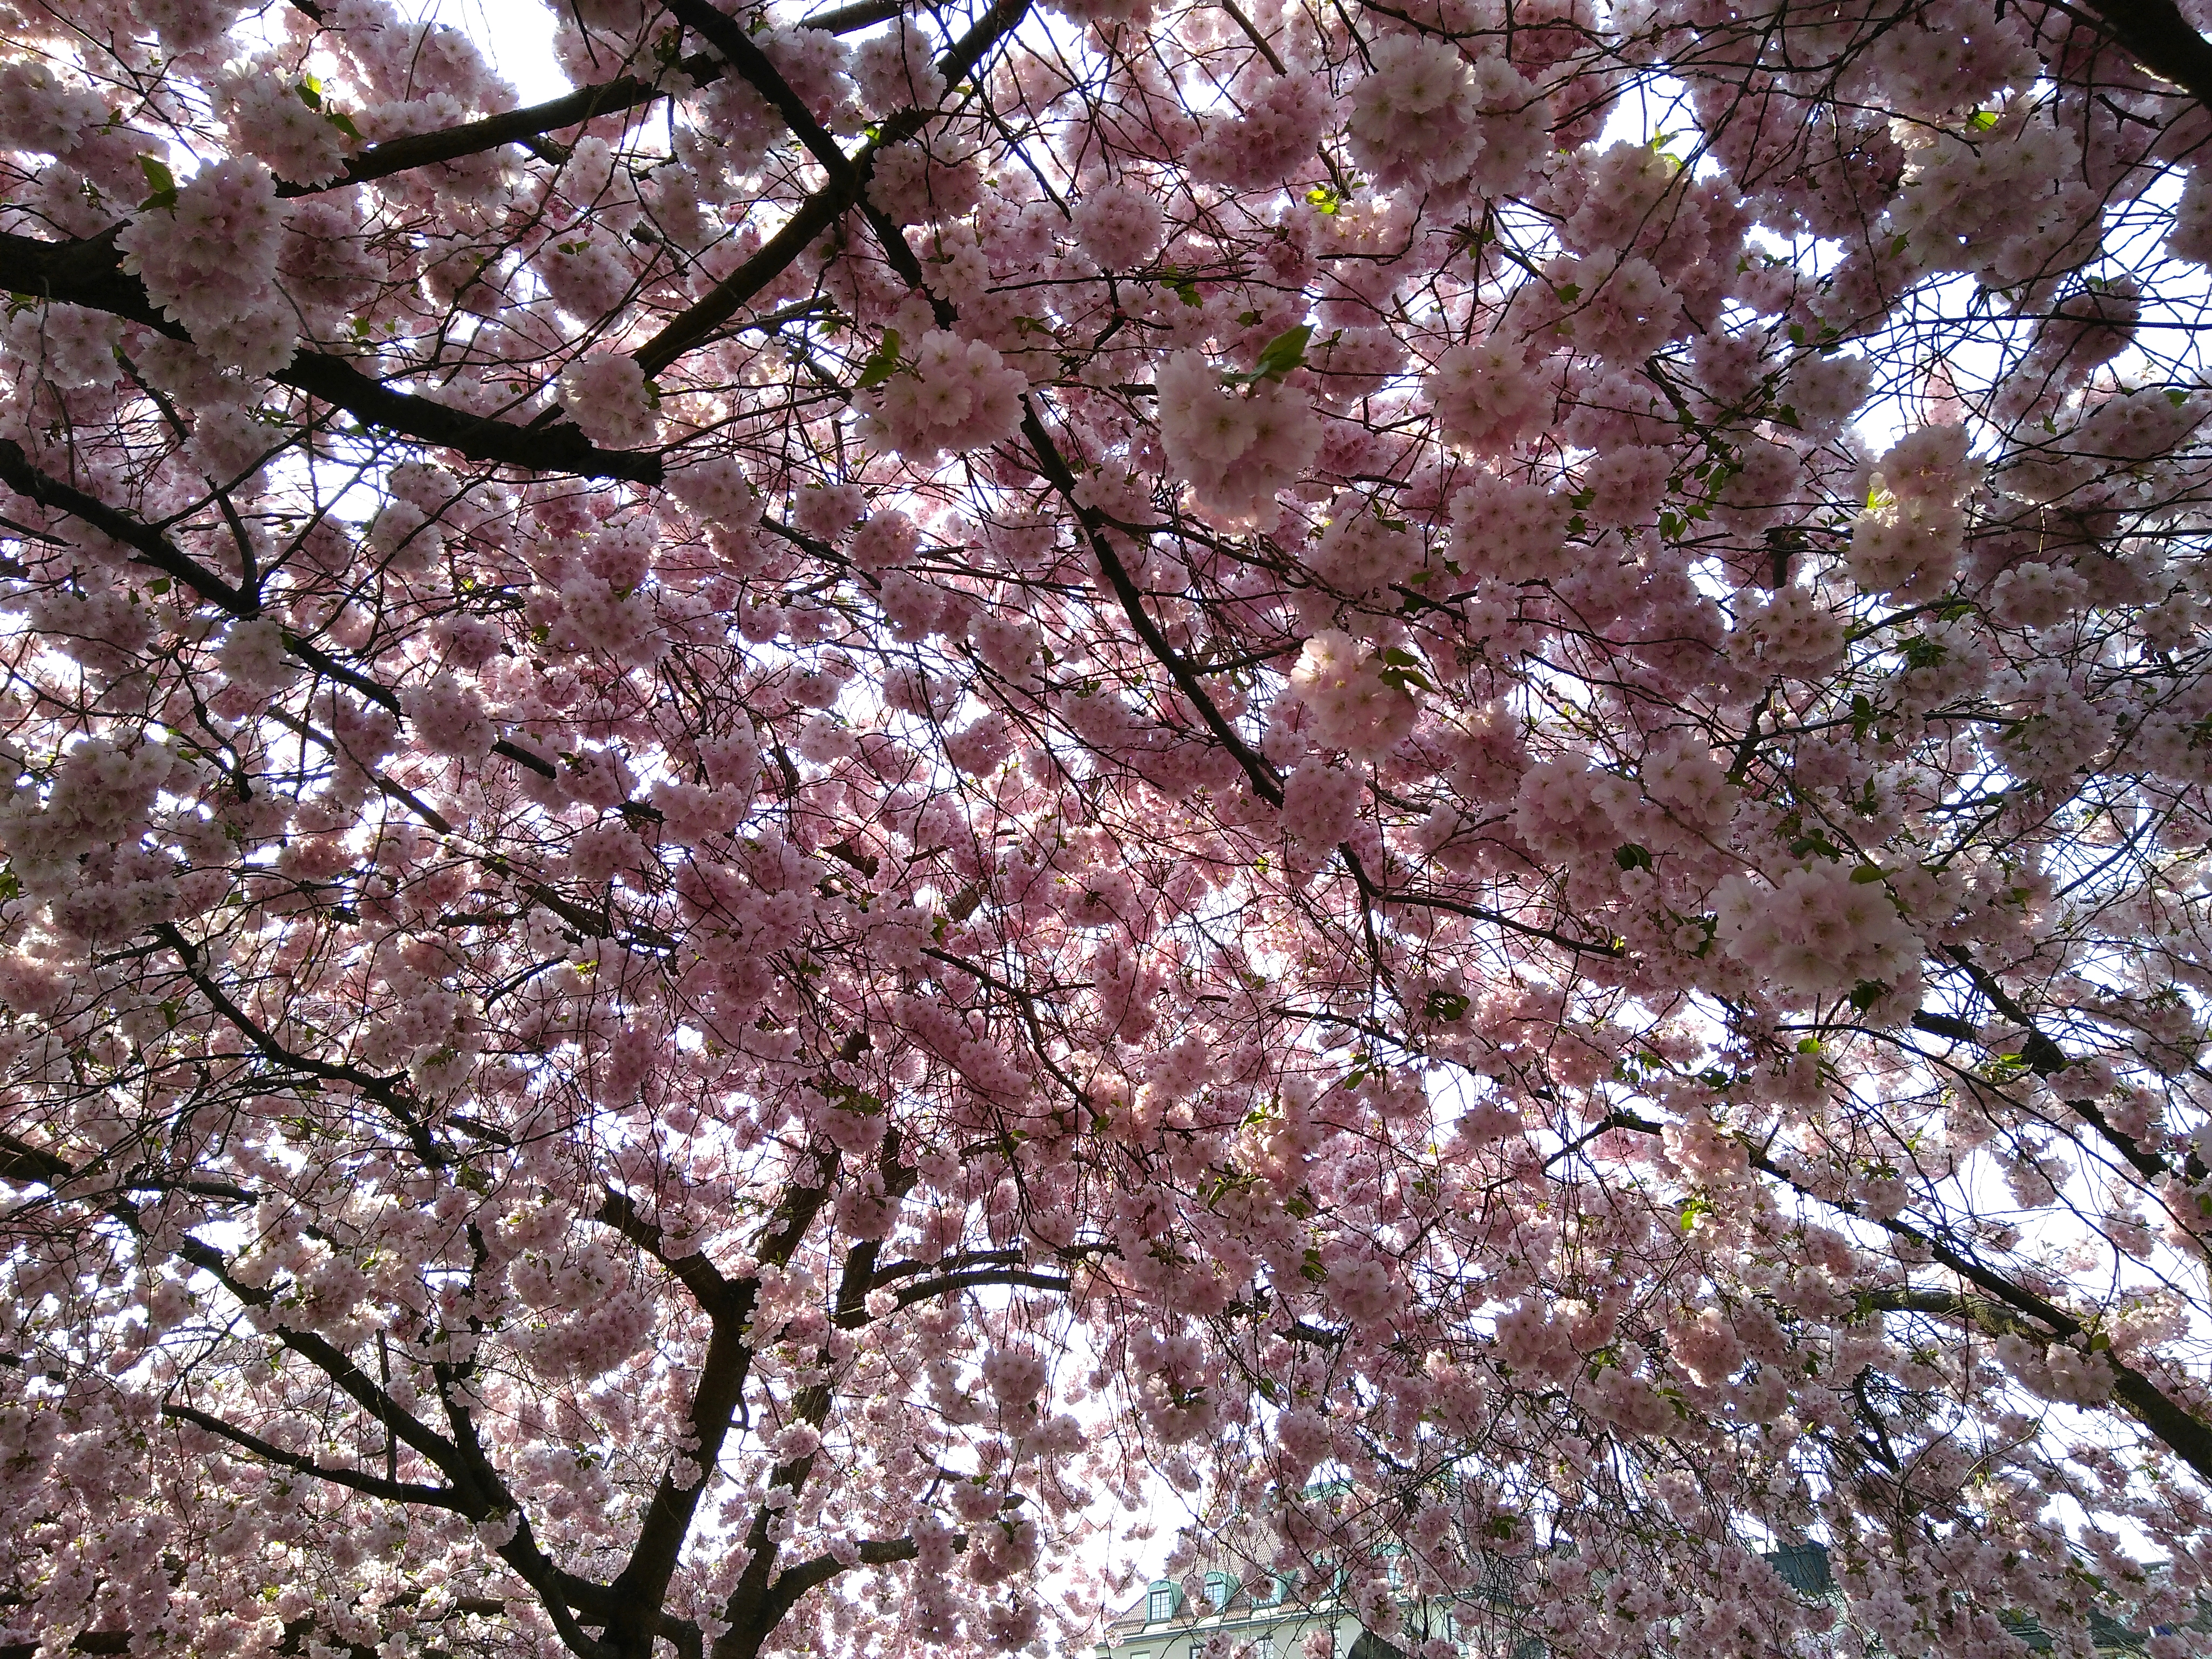 One of the cherry trees of Kungsträdgården, a square that I discovered completely randomly on my last day